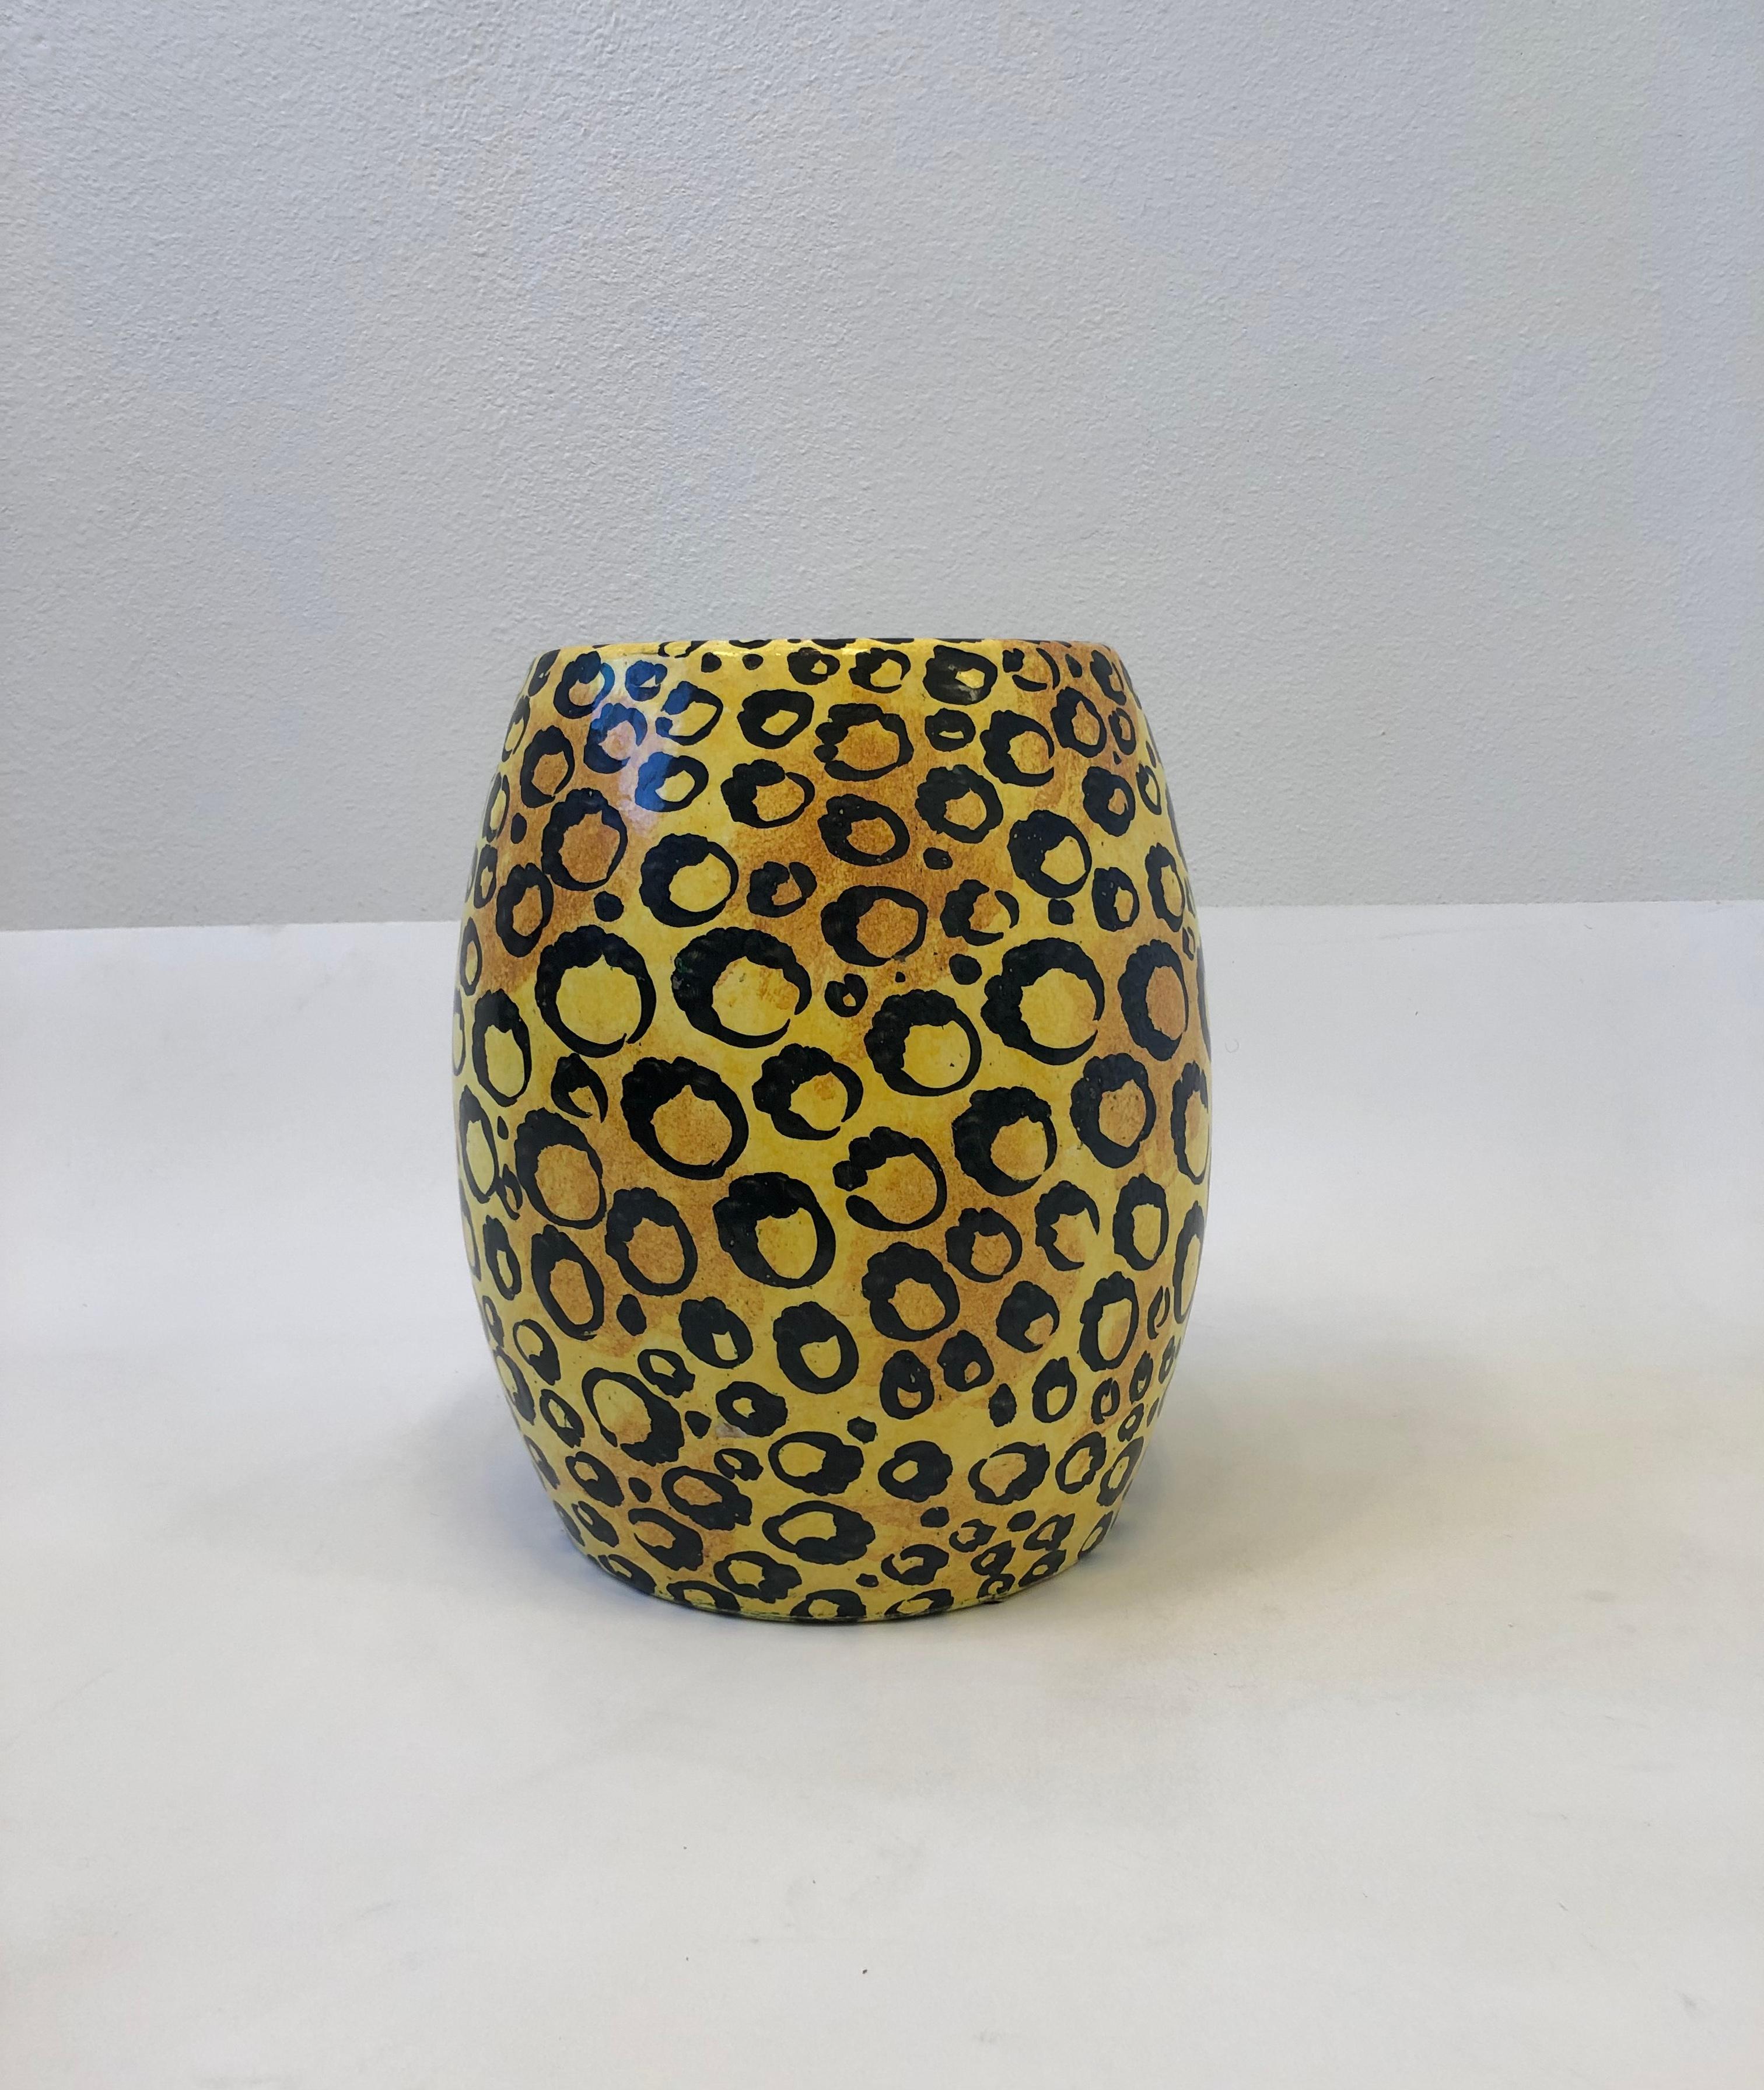 1960’s Spanish ceramic with hand painted leopard print glazed drum table. 
It has two oval holes on the sides to use for lifting and moving. 
Marked Spain in the inside, It has a slight stress crack (see detail photos). 
Measurements: 15.5” high